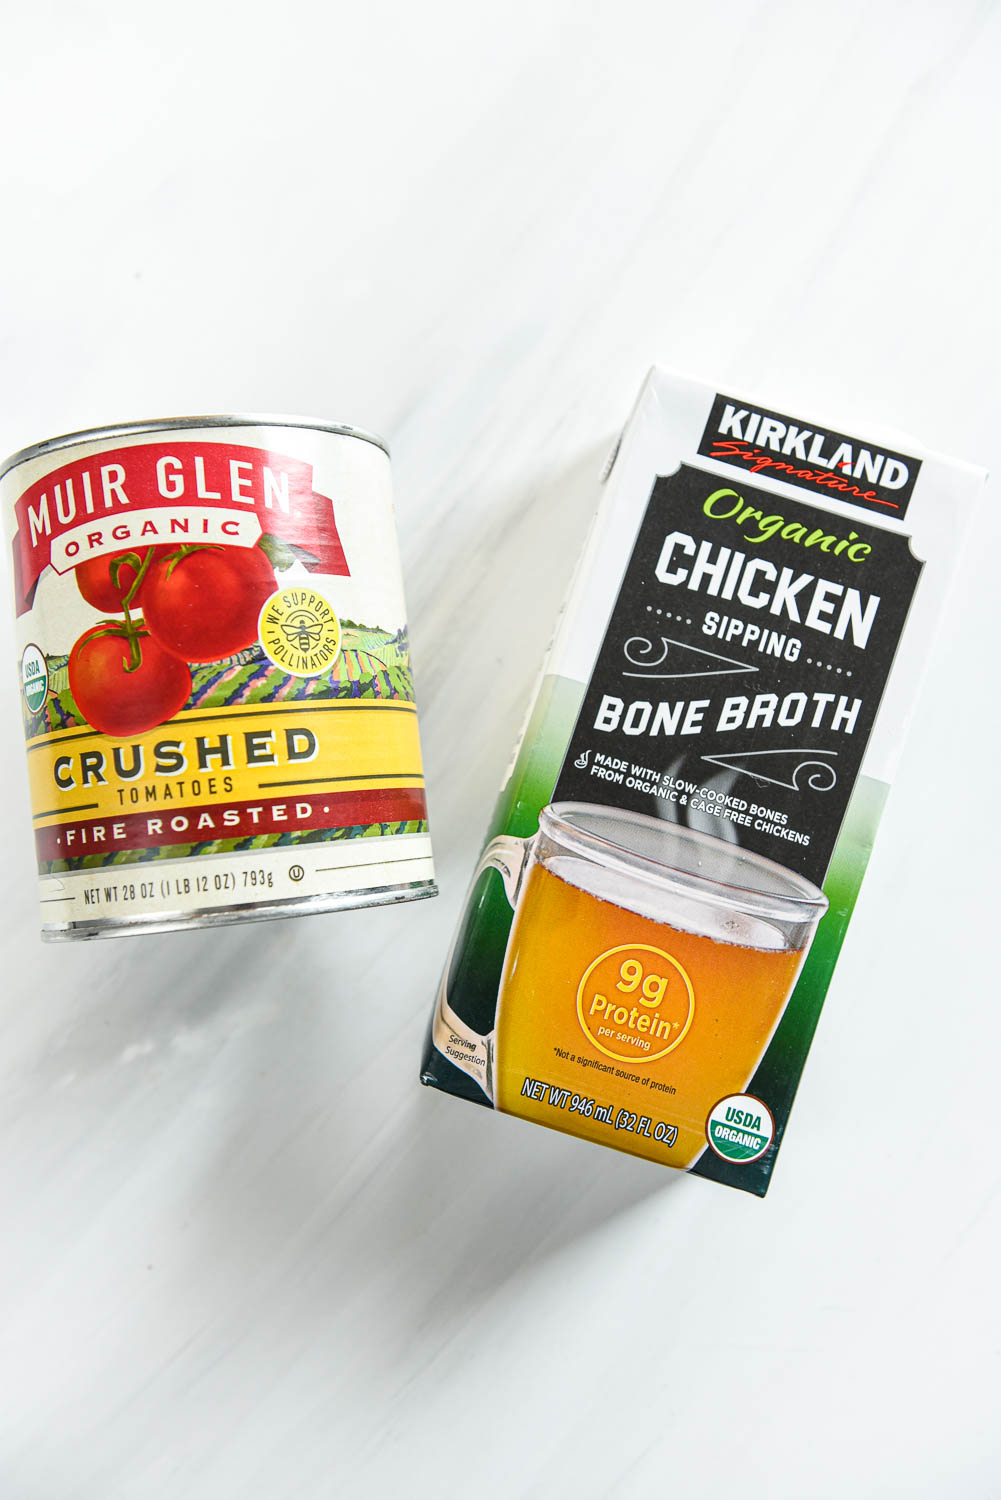 can of crushed tomatoes and box of chicken bone broth